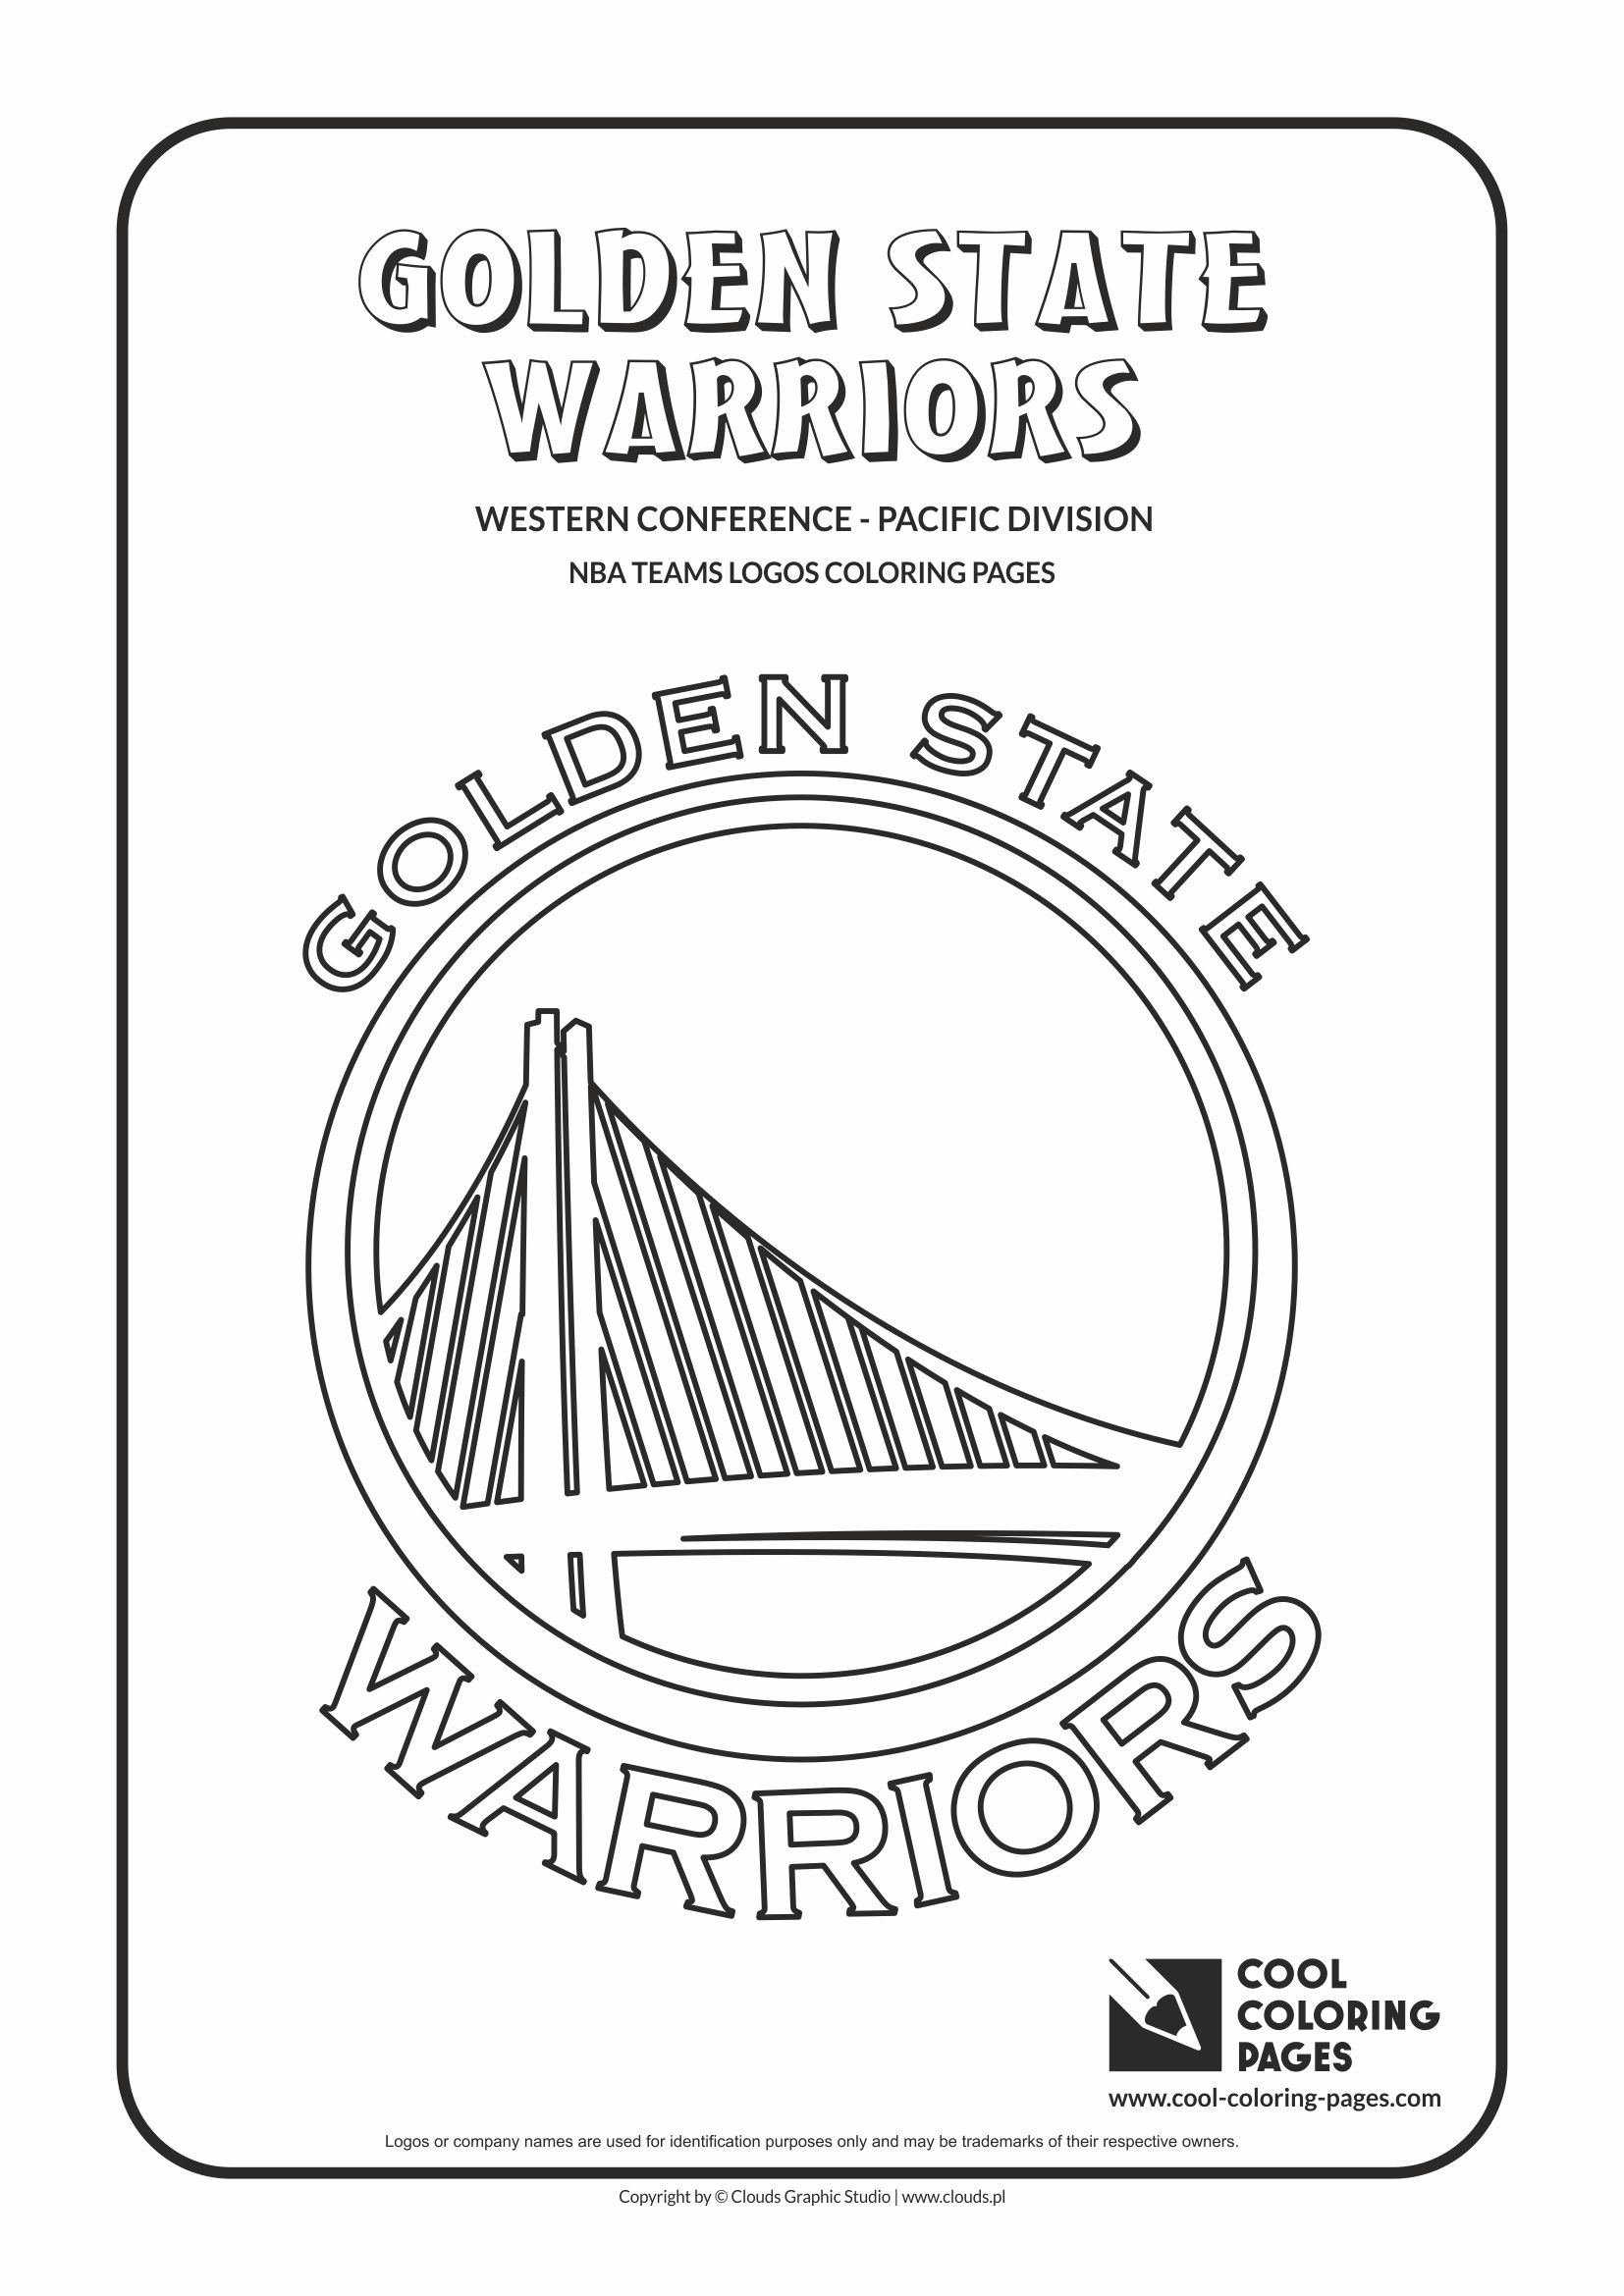 Cool Coloring Pages - NBA Basketball Clubs Logos - Western Conference - Pacific Division / Golden State Warriors logo / Coloring page with Golden State Warriors logo